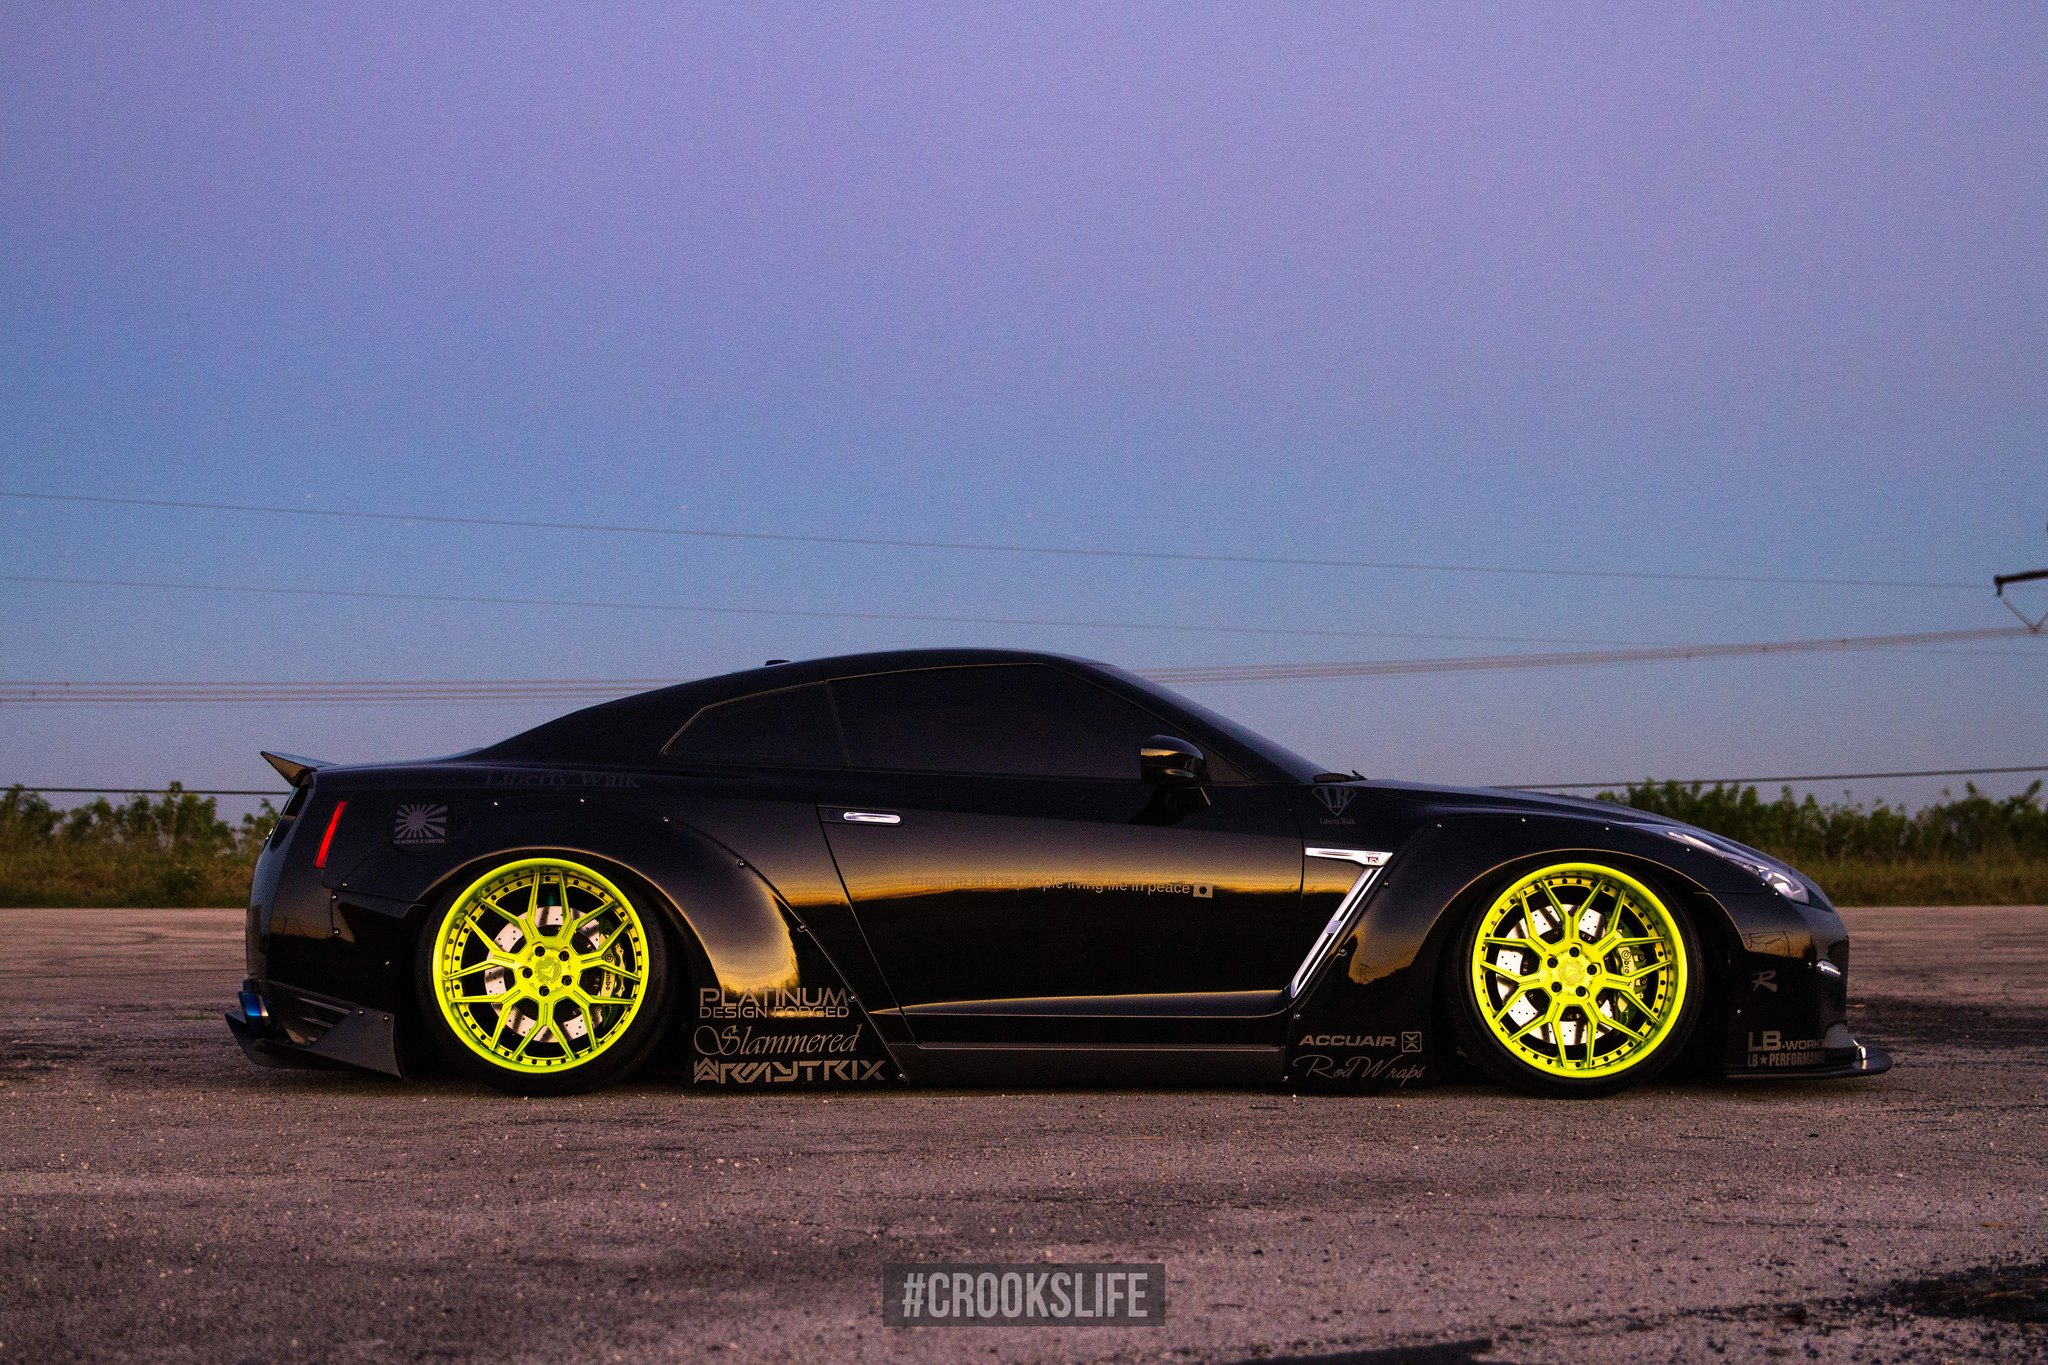 Custom Lime Green Wheels with Brembo Brakes on Nissan GT-R - Photo by Jimmy Crook